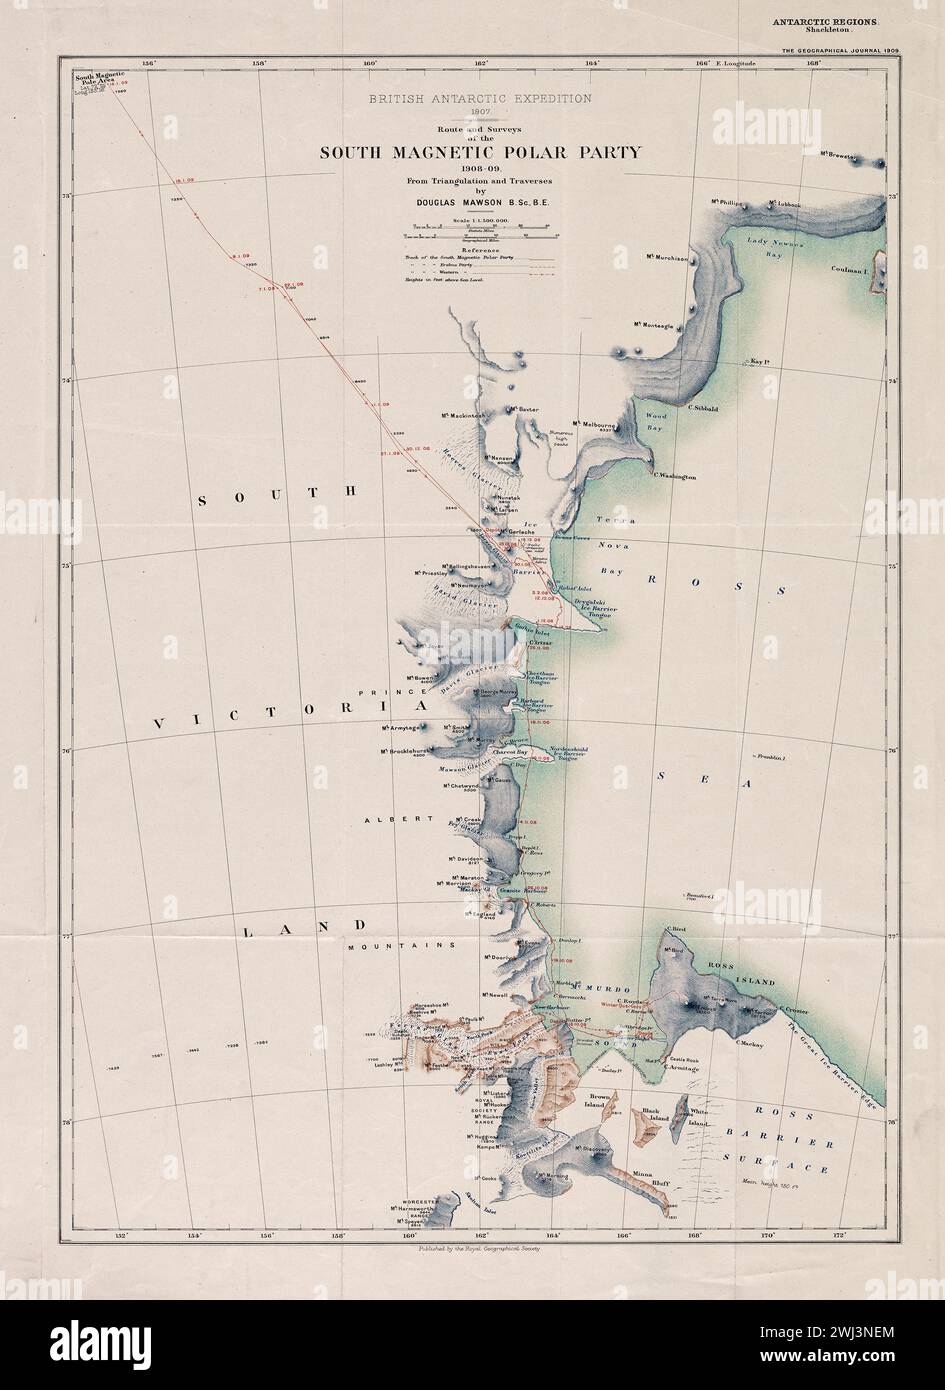 British Antarctic Expedition, 1907: Route and Surveys of the South Magnetic Polar Party, 1908-09: From Triangulation and Traverses / von Douglas Mawson. Historische Karte. Route zur British Antarctic Expedition von South Magnetic Shackleton. Stockfoto